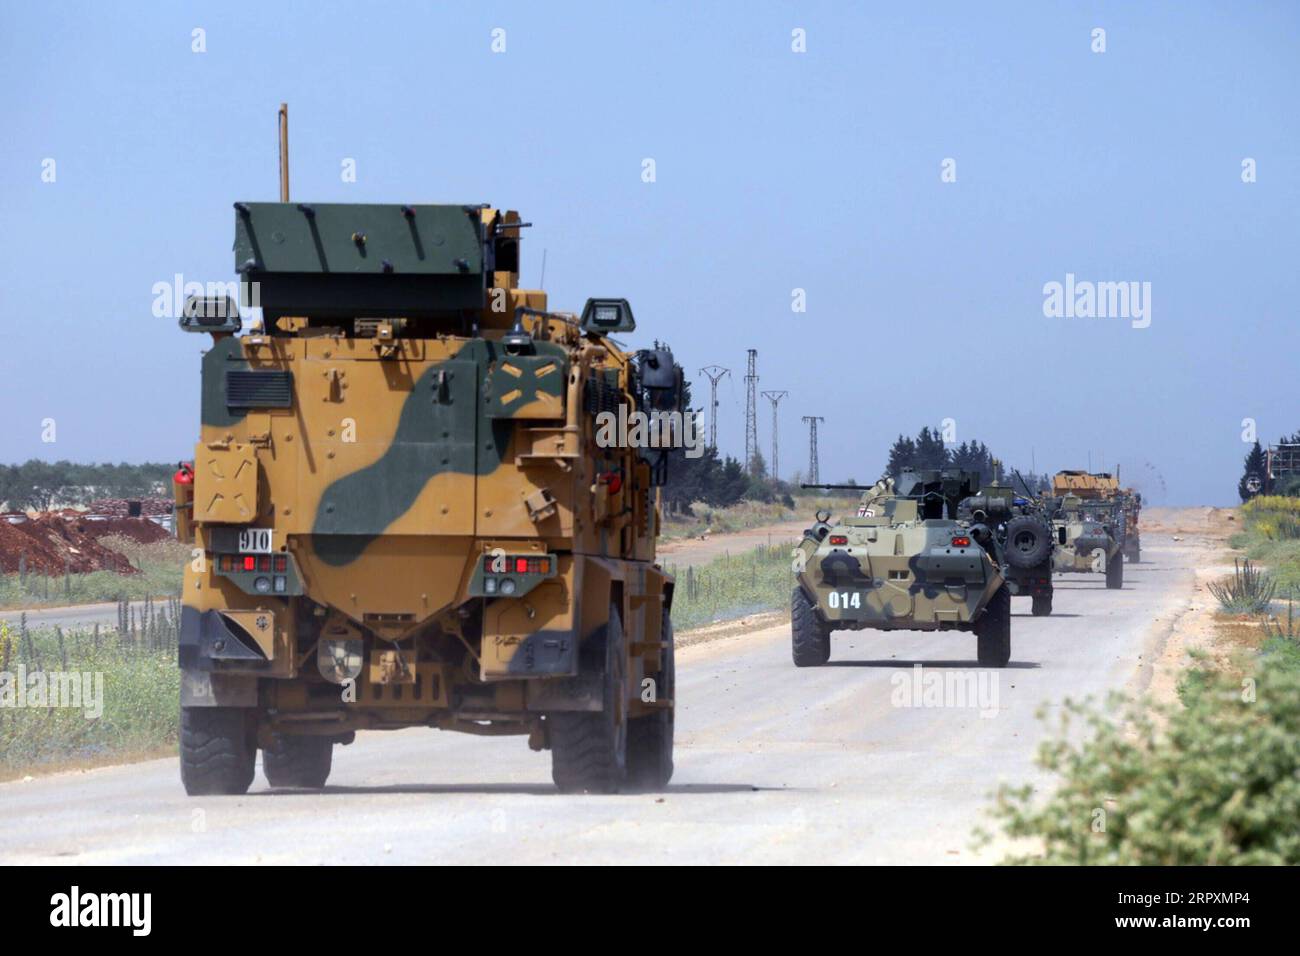 200528 -- IDLIB, May 28, 2020 Xinhua -- Military vehicles are seen during a joint patrol of Turkish and Russian troops in northwestern Idlib province of Syria, on May 28, 2020. Turkish and Russian troops conducted their 13th joint patrol along a key highway in northwestern Idlib province of Syria, the Turkish defense ministry said on Thursday. Xinhua SYRIA-IDLIB-TURKEY-RUSSIA-JOINT PATROL PUBLICATIONxNOTxINxCHN Stock Photo